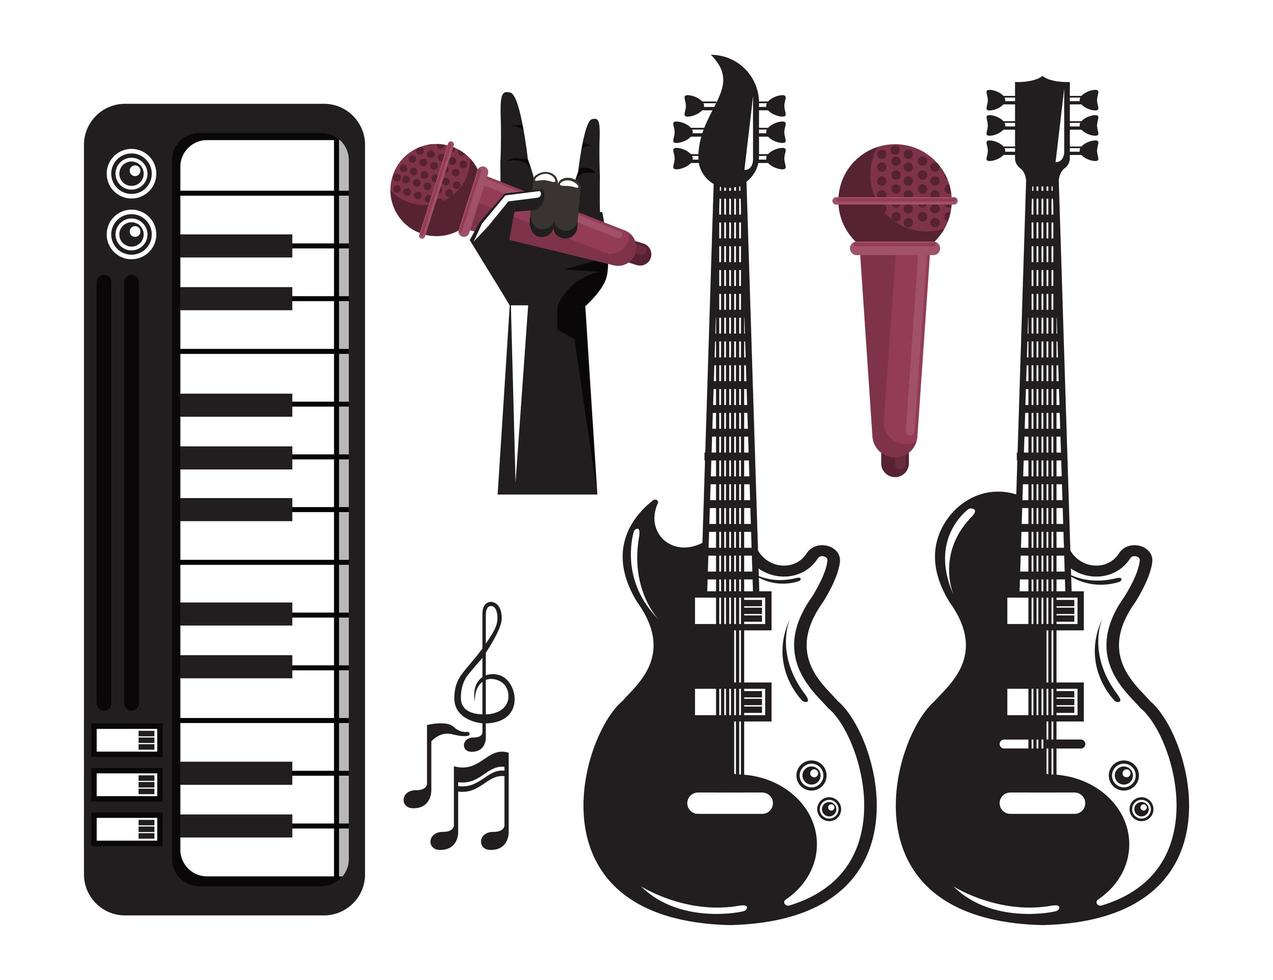 international music festival poster with electric guitars and set icons vector